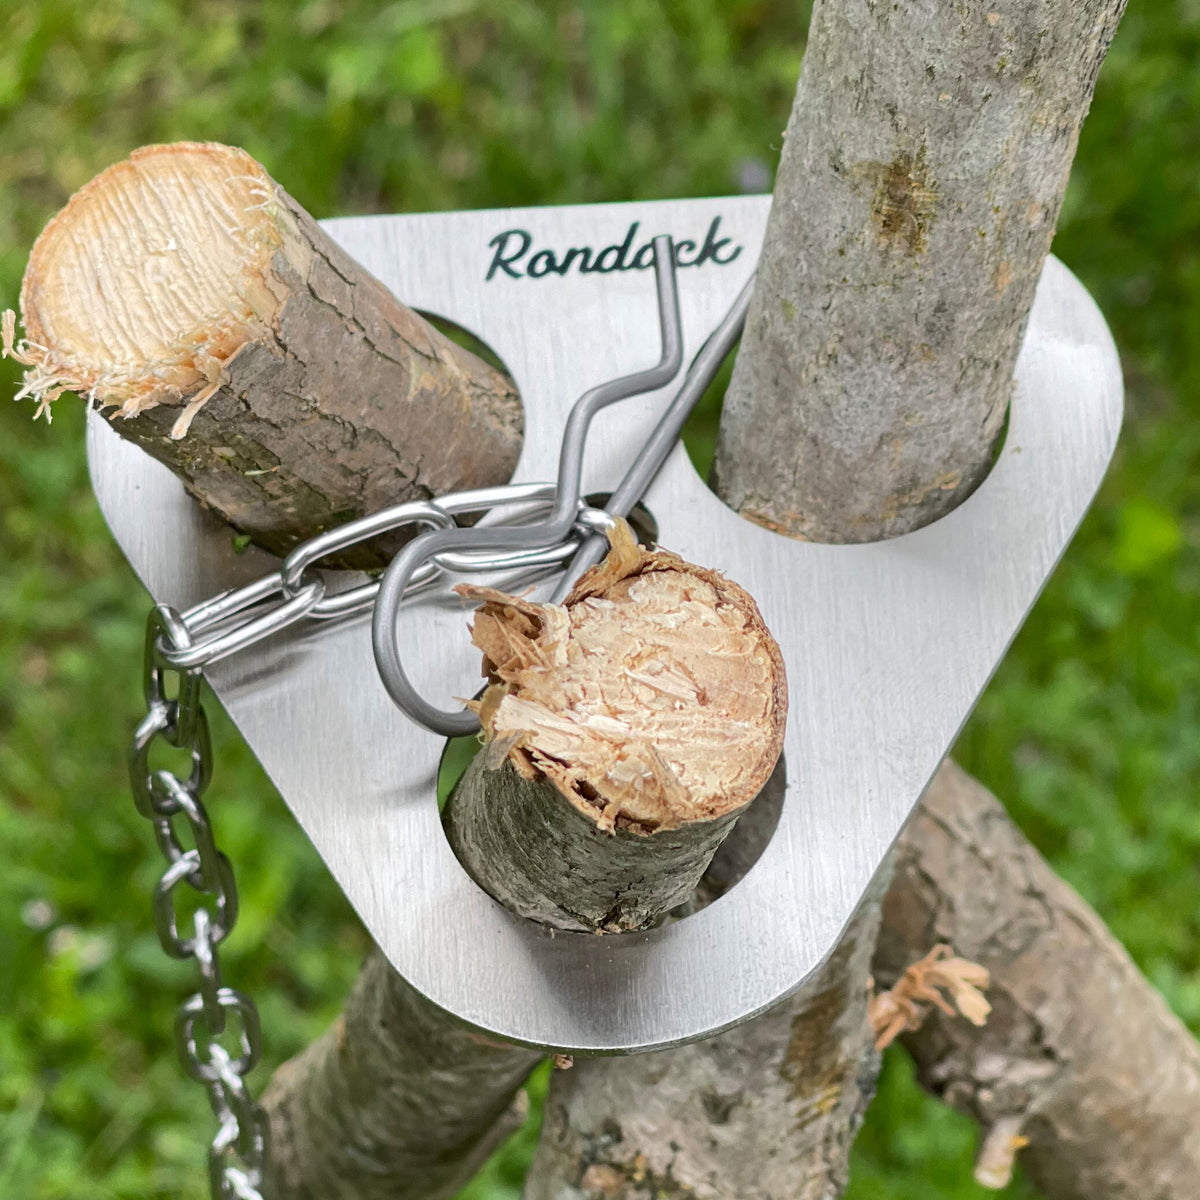 Rondack Campfire Tripod | Compact Campfire Cooking Tool